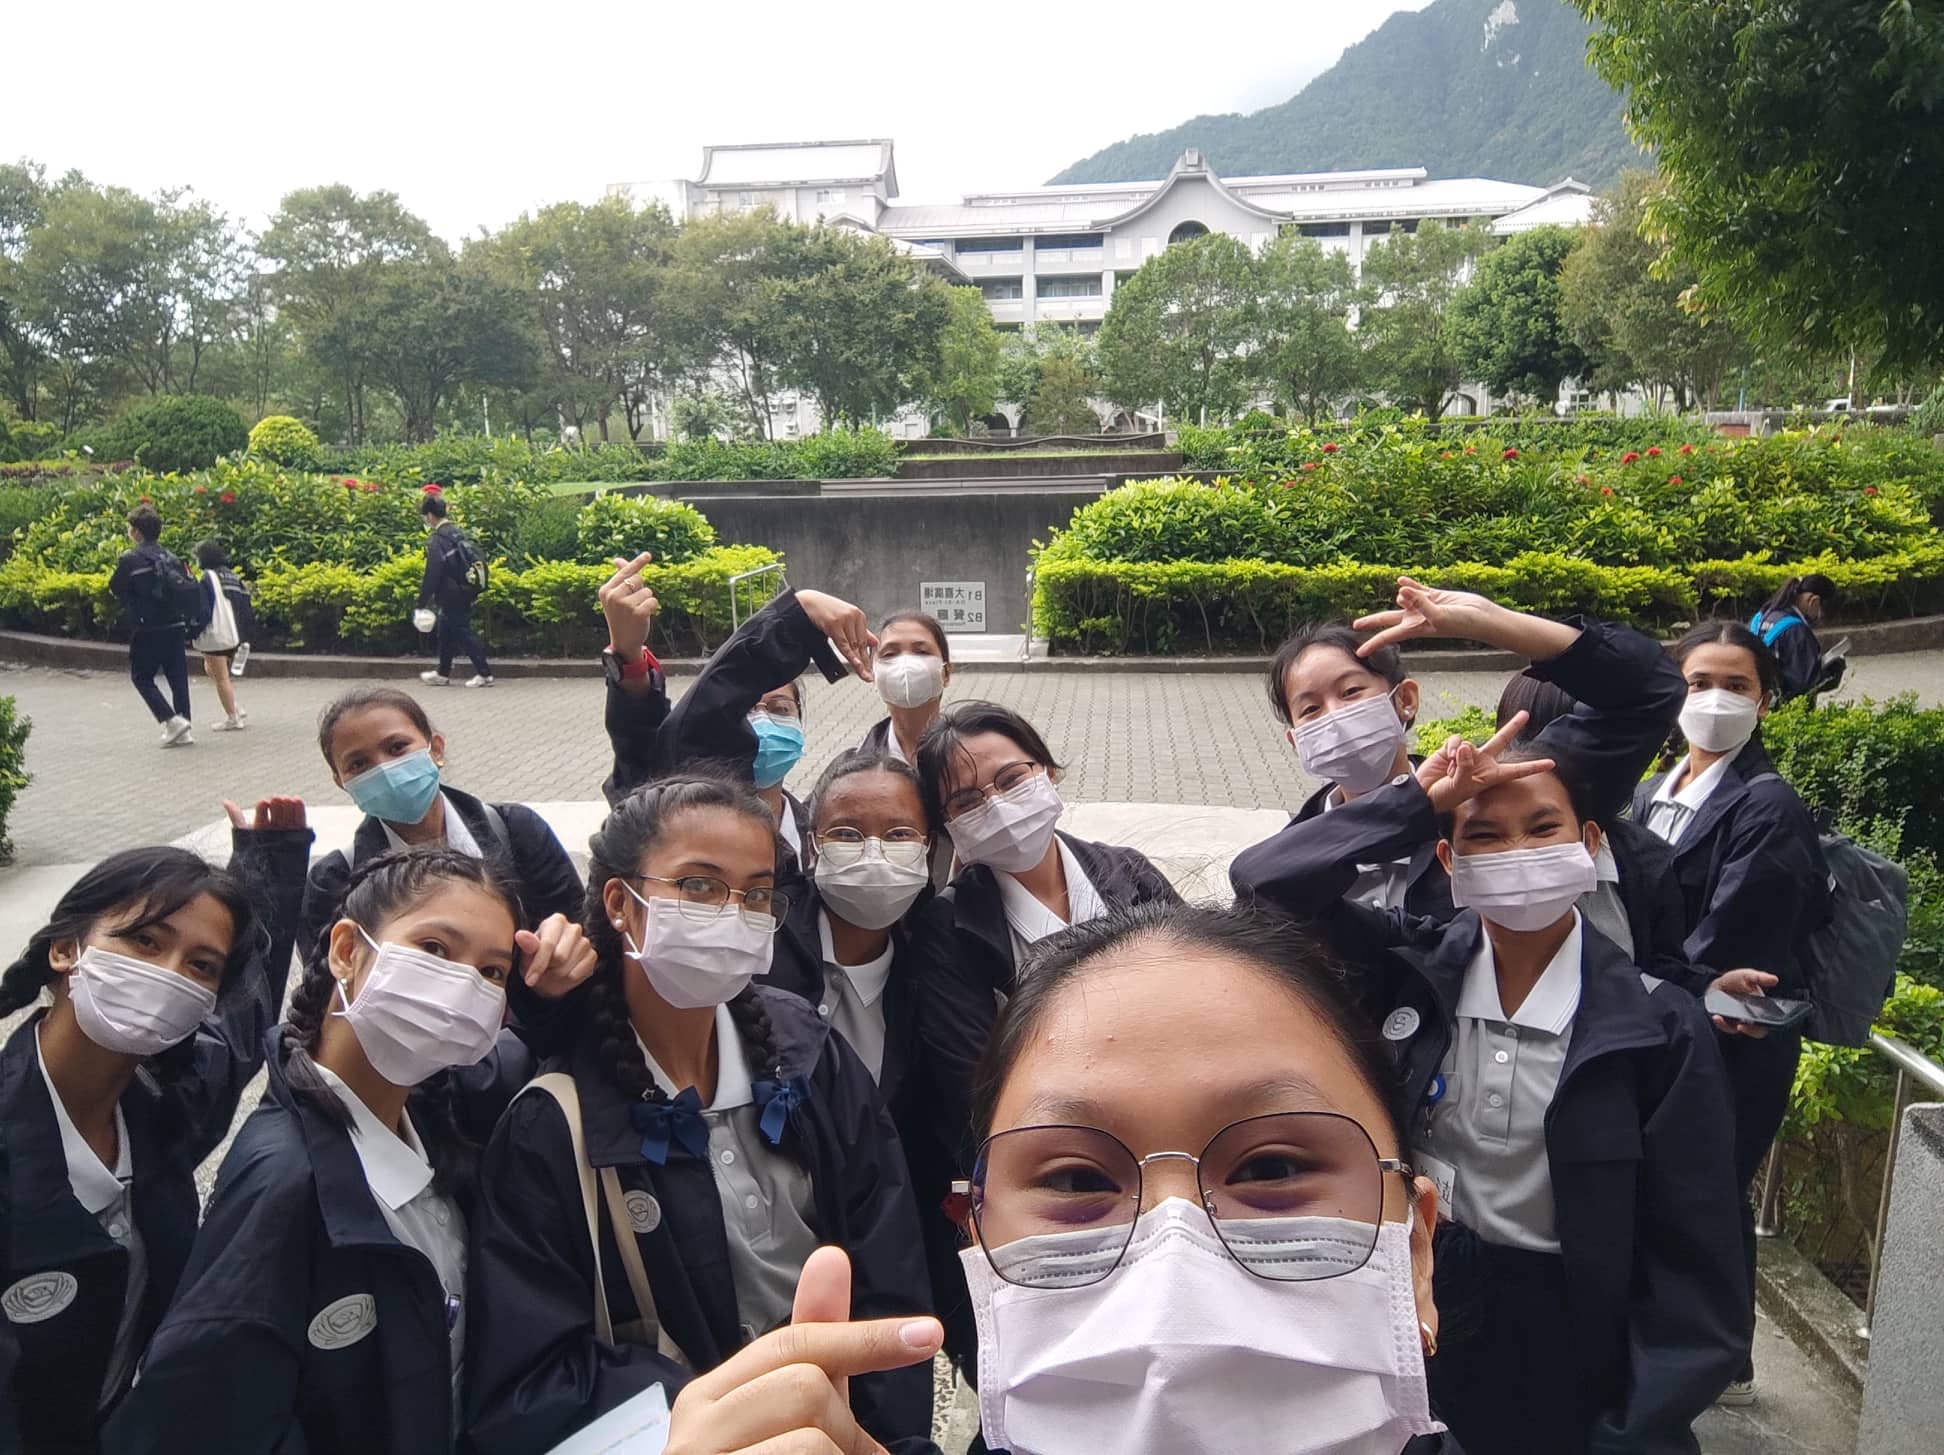 Scholars take a tour of the Tzu Chi University of Science and Technology in Hualien, Taiwan.